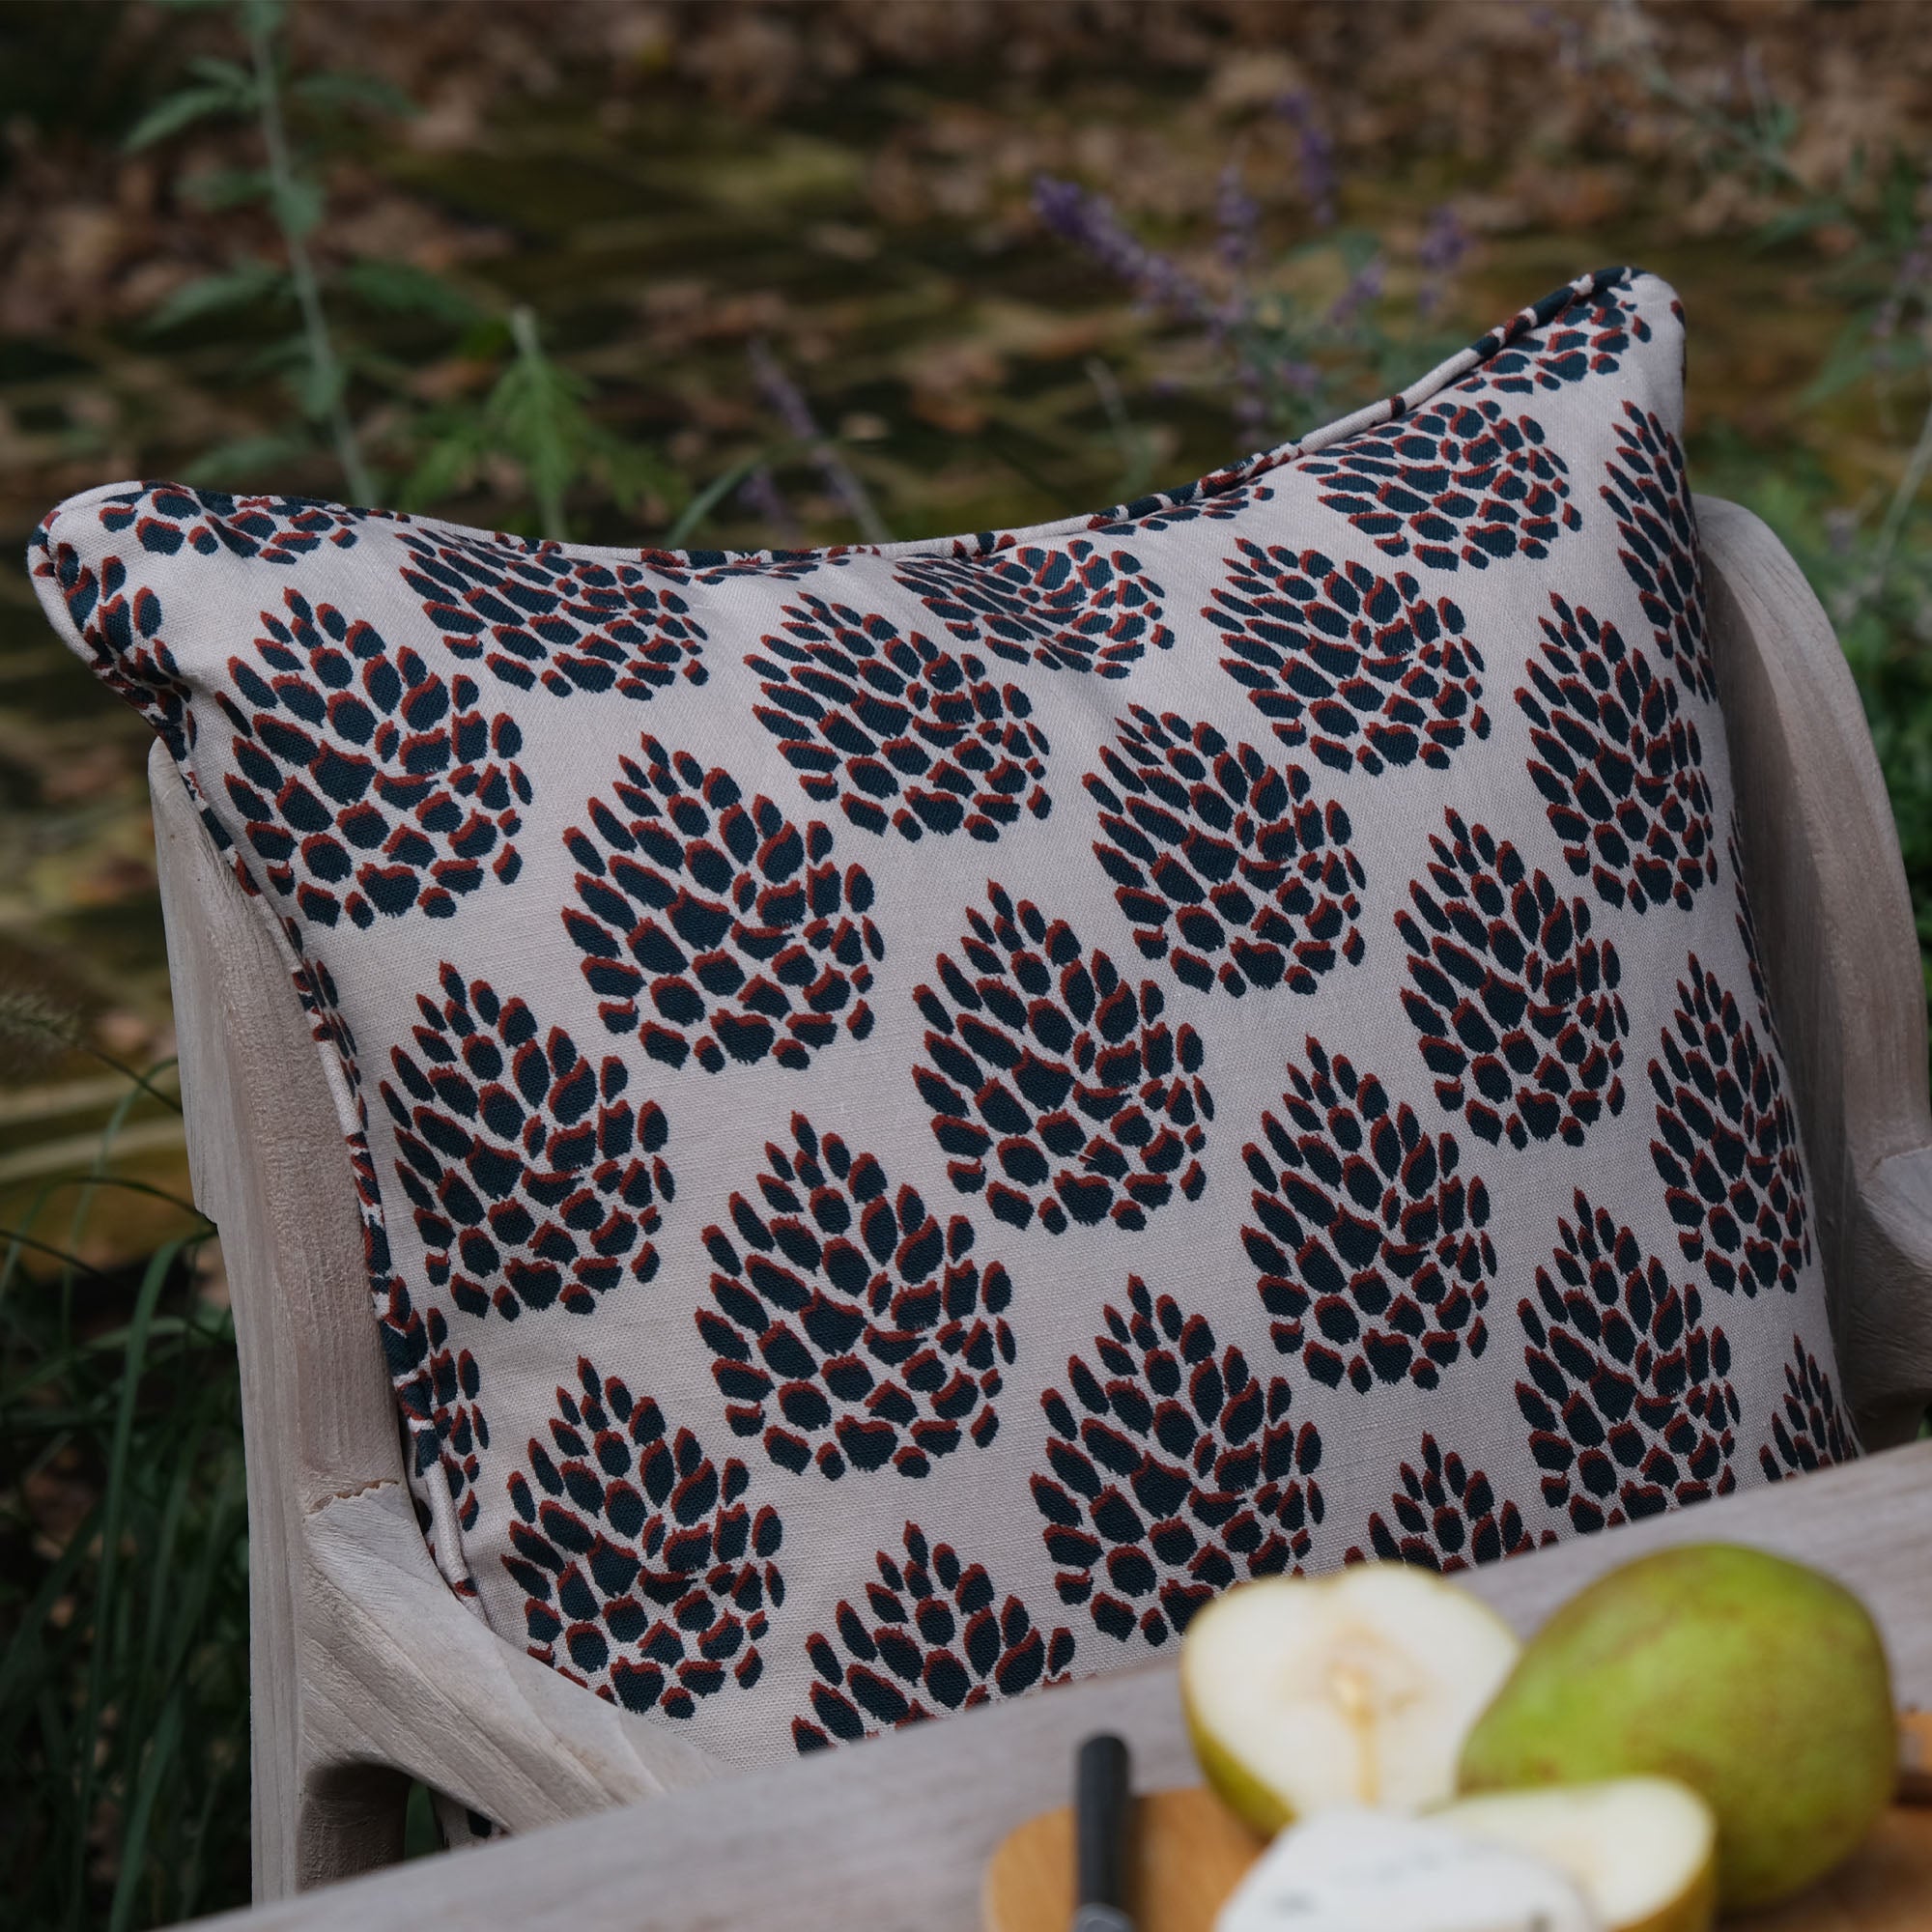 Pine Cones Cushion | Mulberry